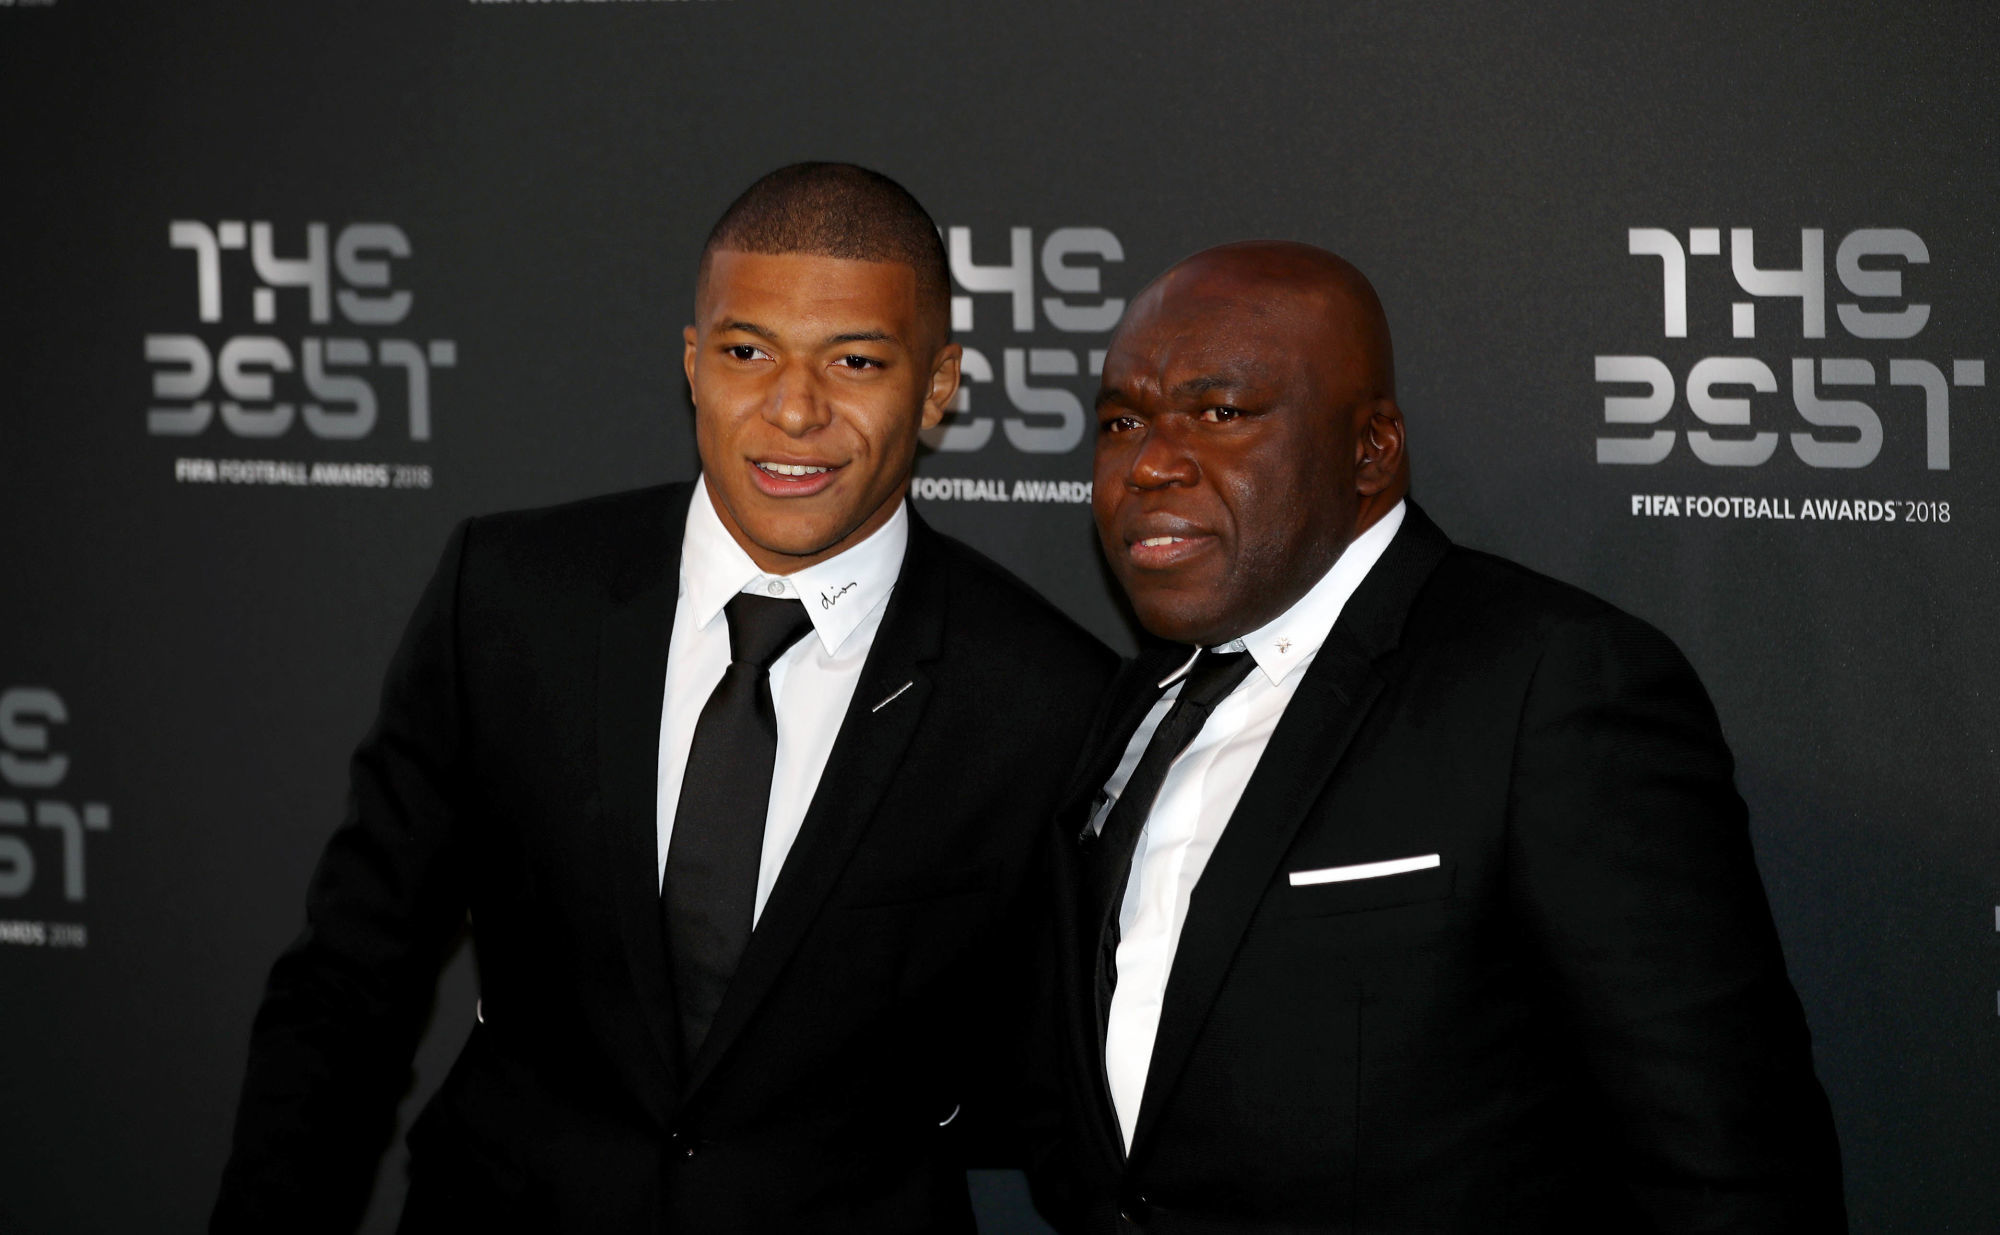 Kylian Mbappe and Wilfried Mbappe (right) during the Best FIFA Football Awards 2018 at the Royal Festival Hall, London.  Best FIFA Football Awards 2018 at the Palladium Theatre, London on 24 September 2018 Photo : PA Images / Icon Sport